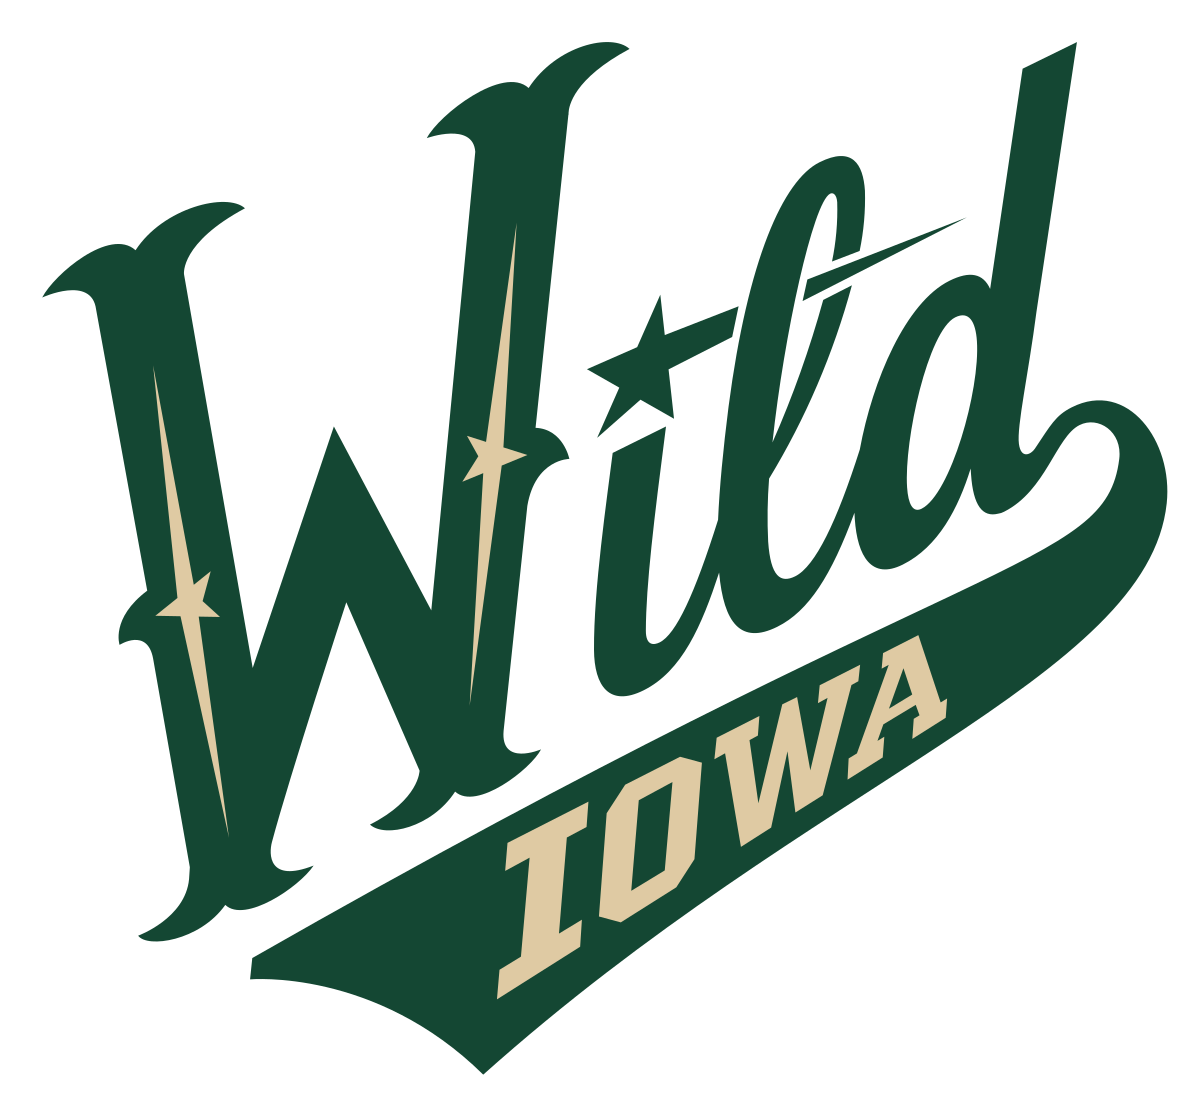 Enter to Win Tickets to see the Iowa Wild!